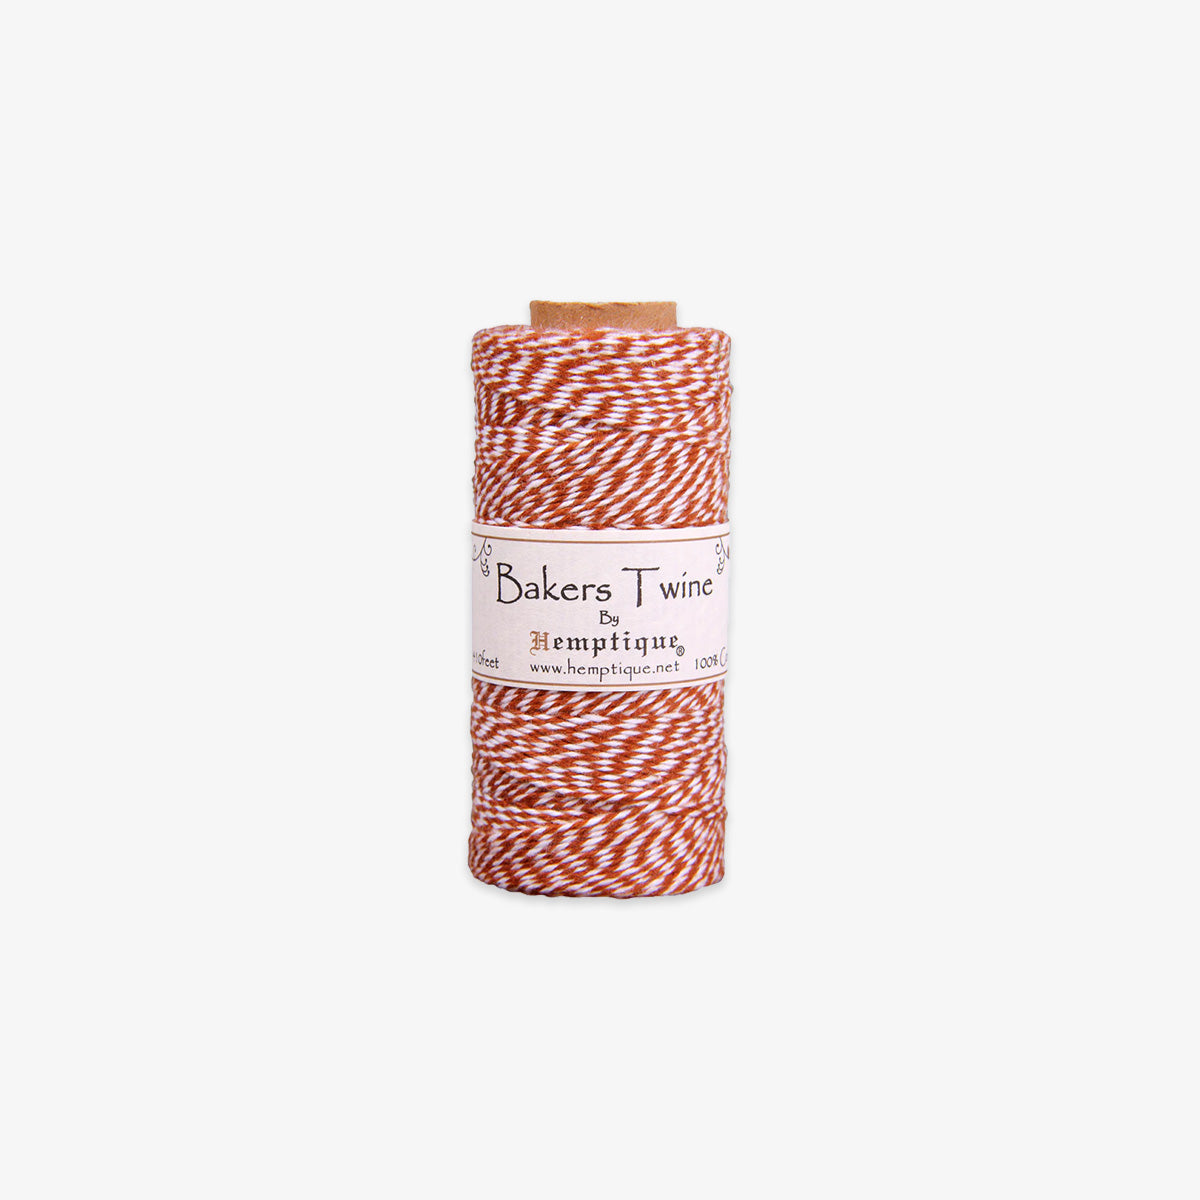 BAKERS TWINE // LIGHT BROWN & WHITE